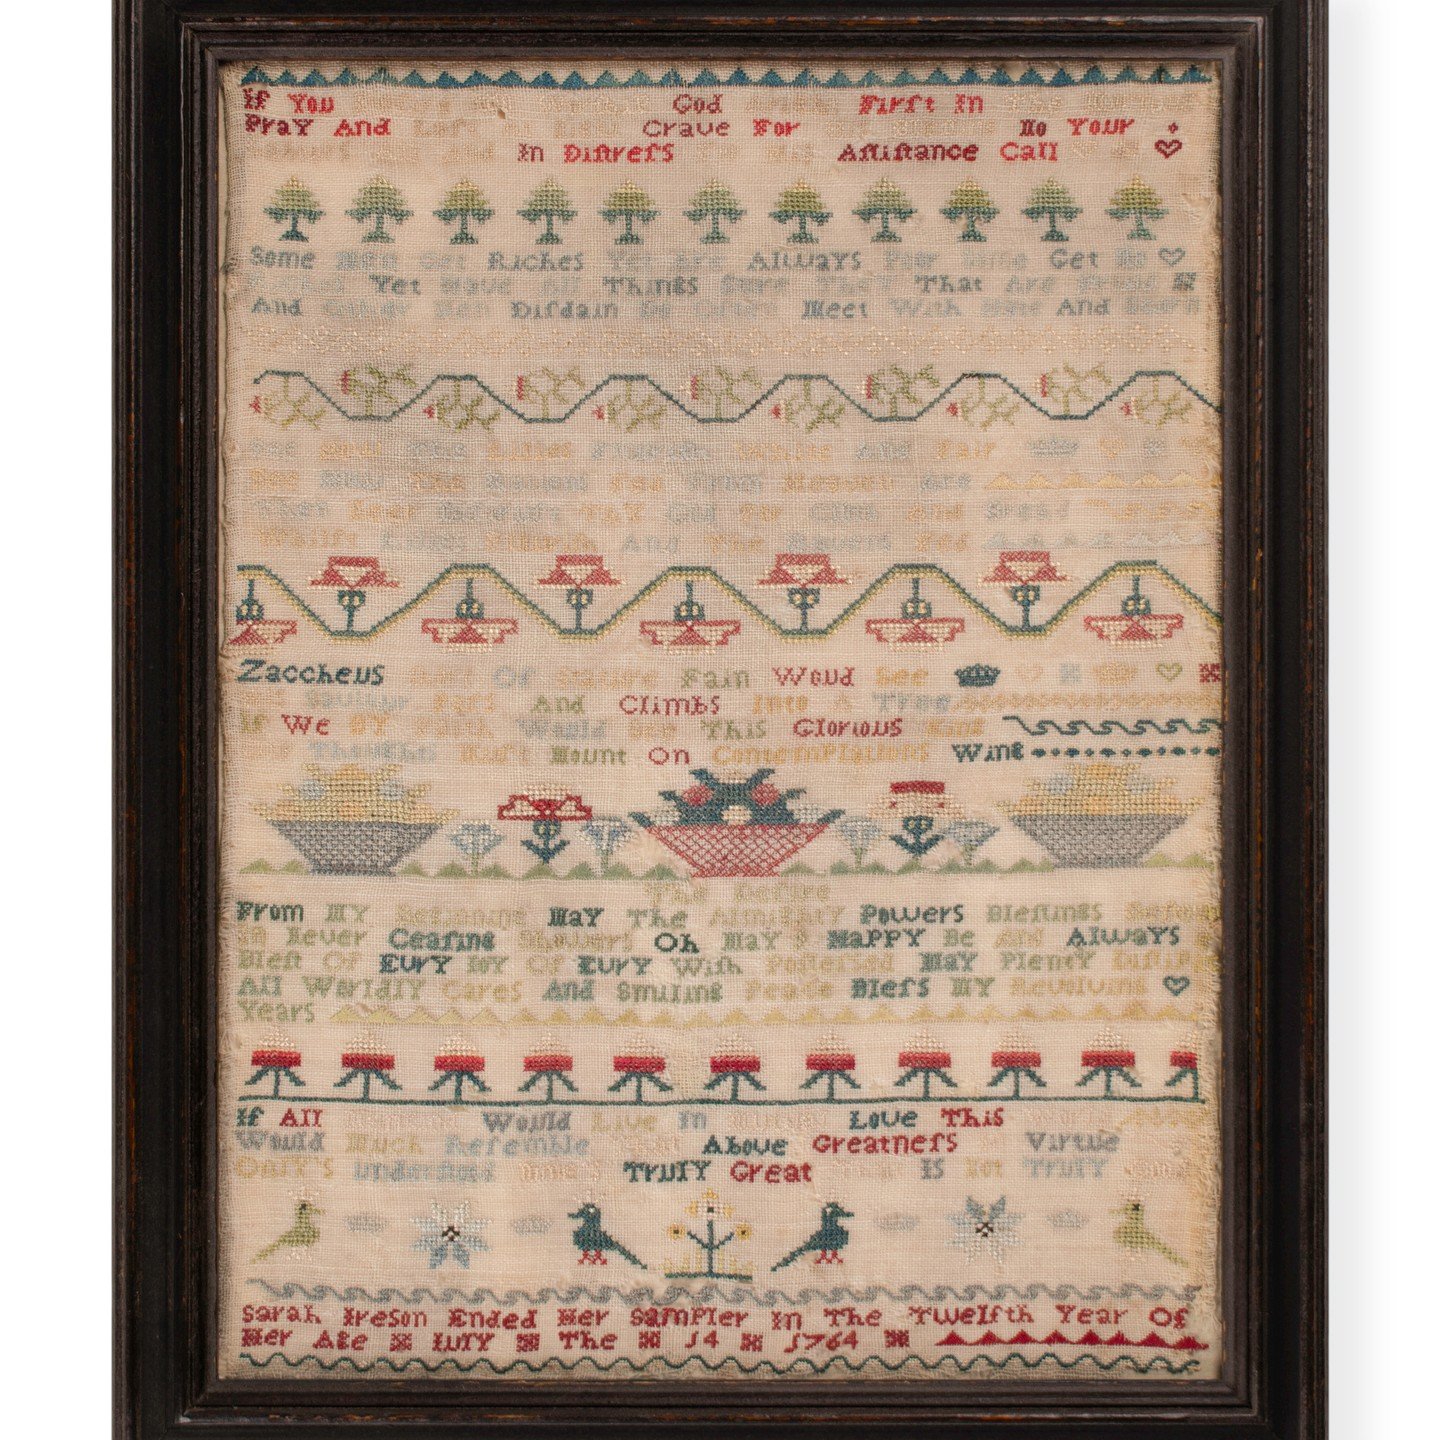 Please come join for an Antique Sampler Presentation on
​Sunday, May 19
1:00 PM
Hjemkomst Center, Fargo/Morehead, ND
​Free​
#samplerstitchersofinstagram 
#samplerstitcher 
#samplerlove
#crossstitchersofinstagram 
#primitivestitching
	
Join us for a p